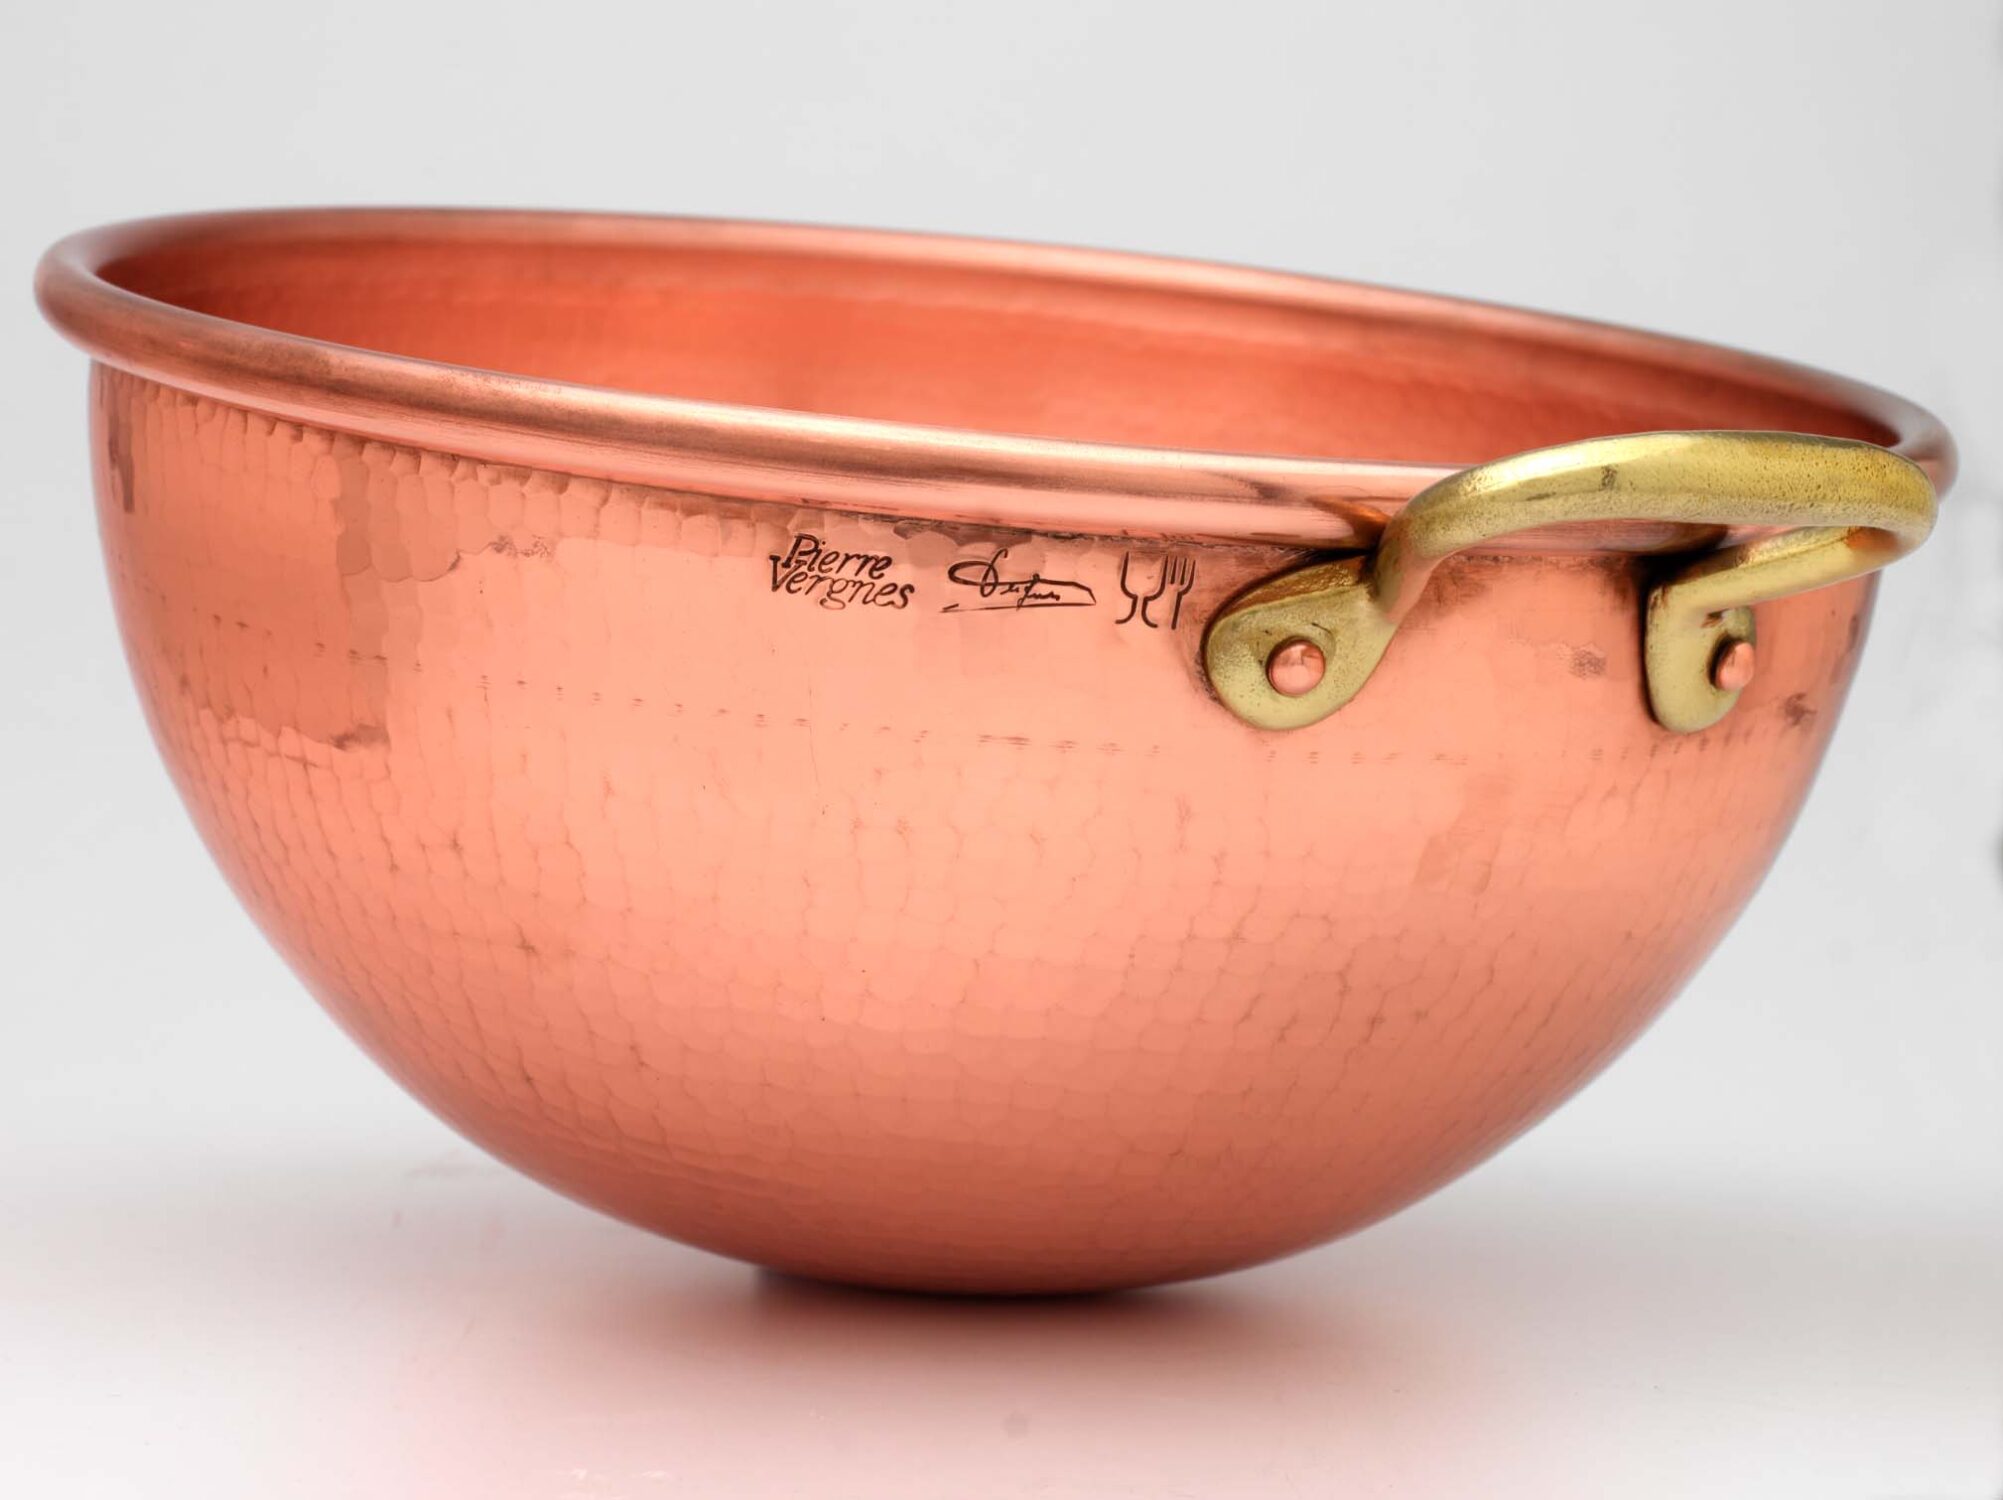 Turkish Copper Mixing Bowls - Small